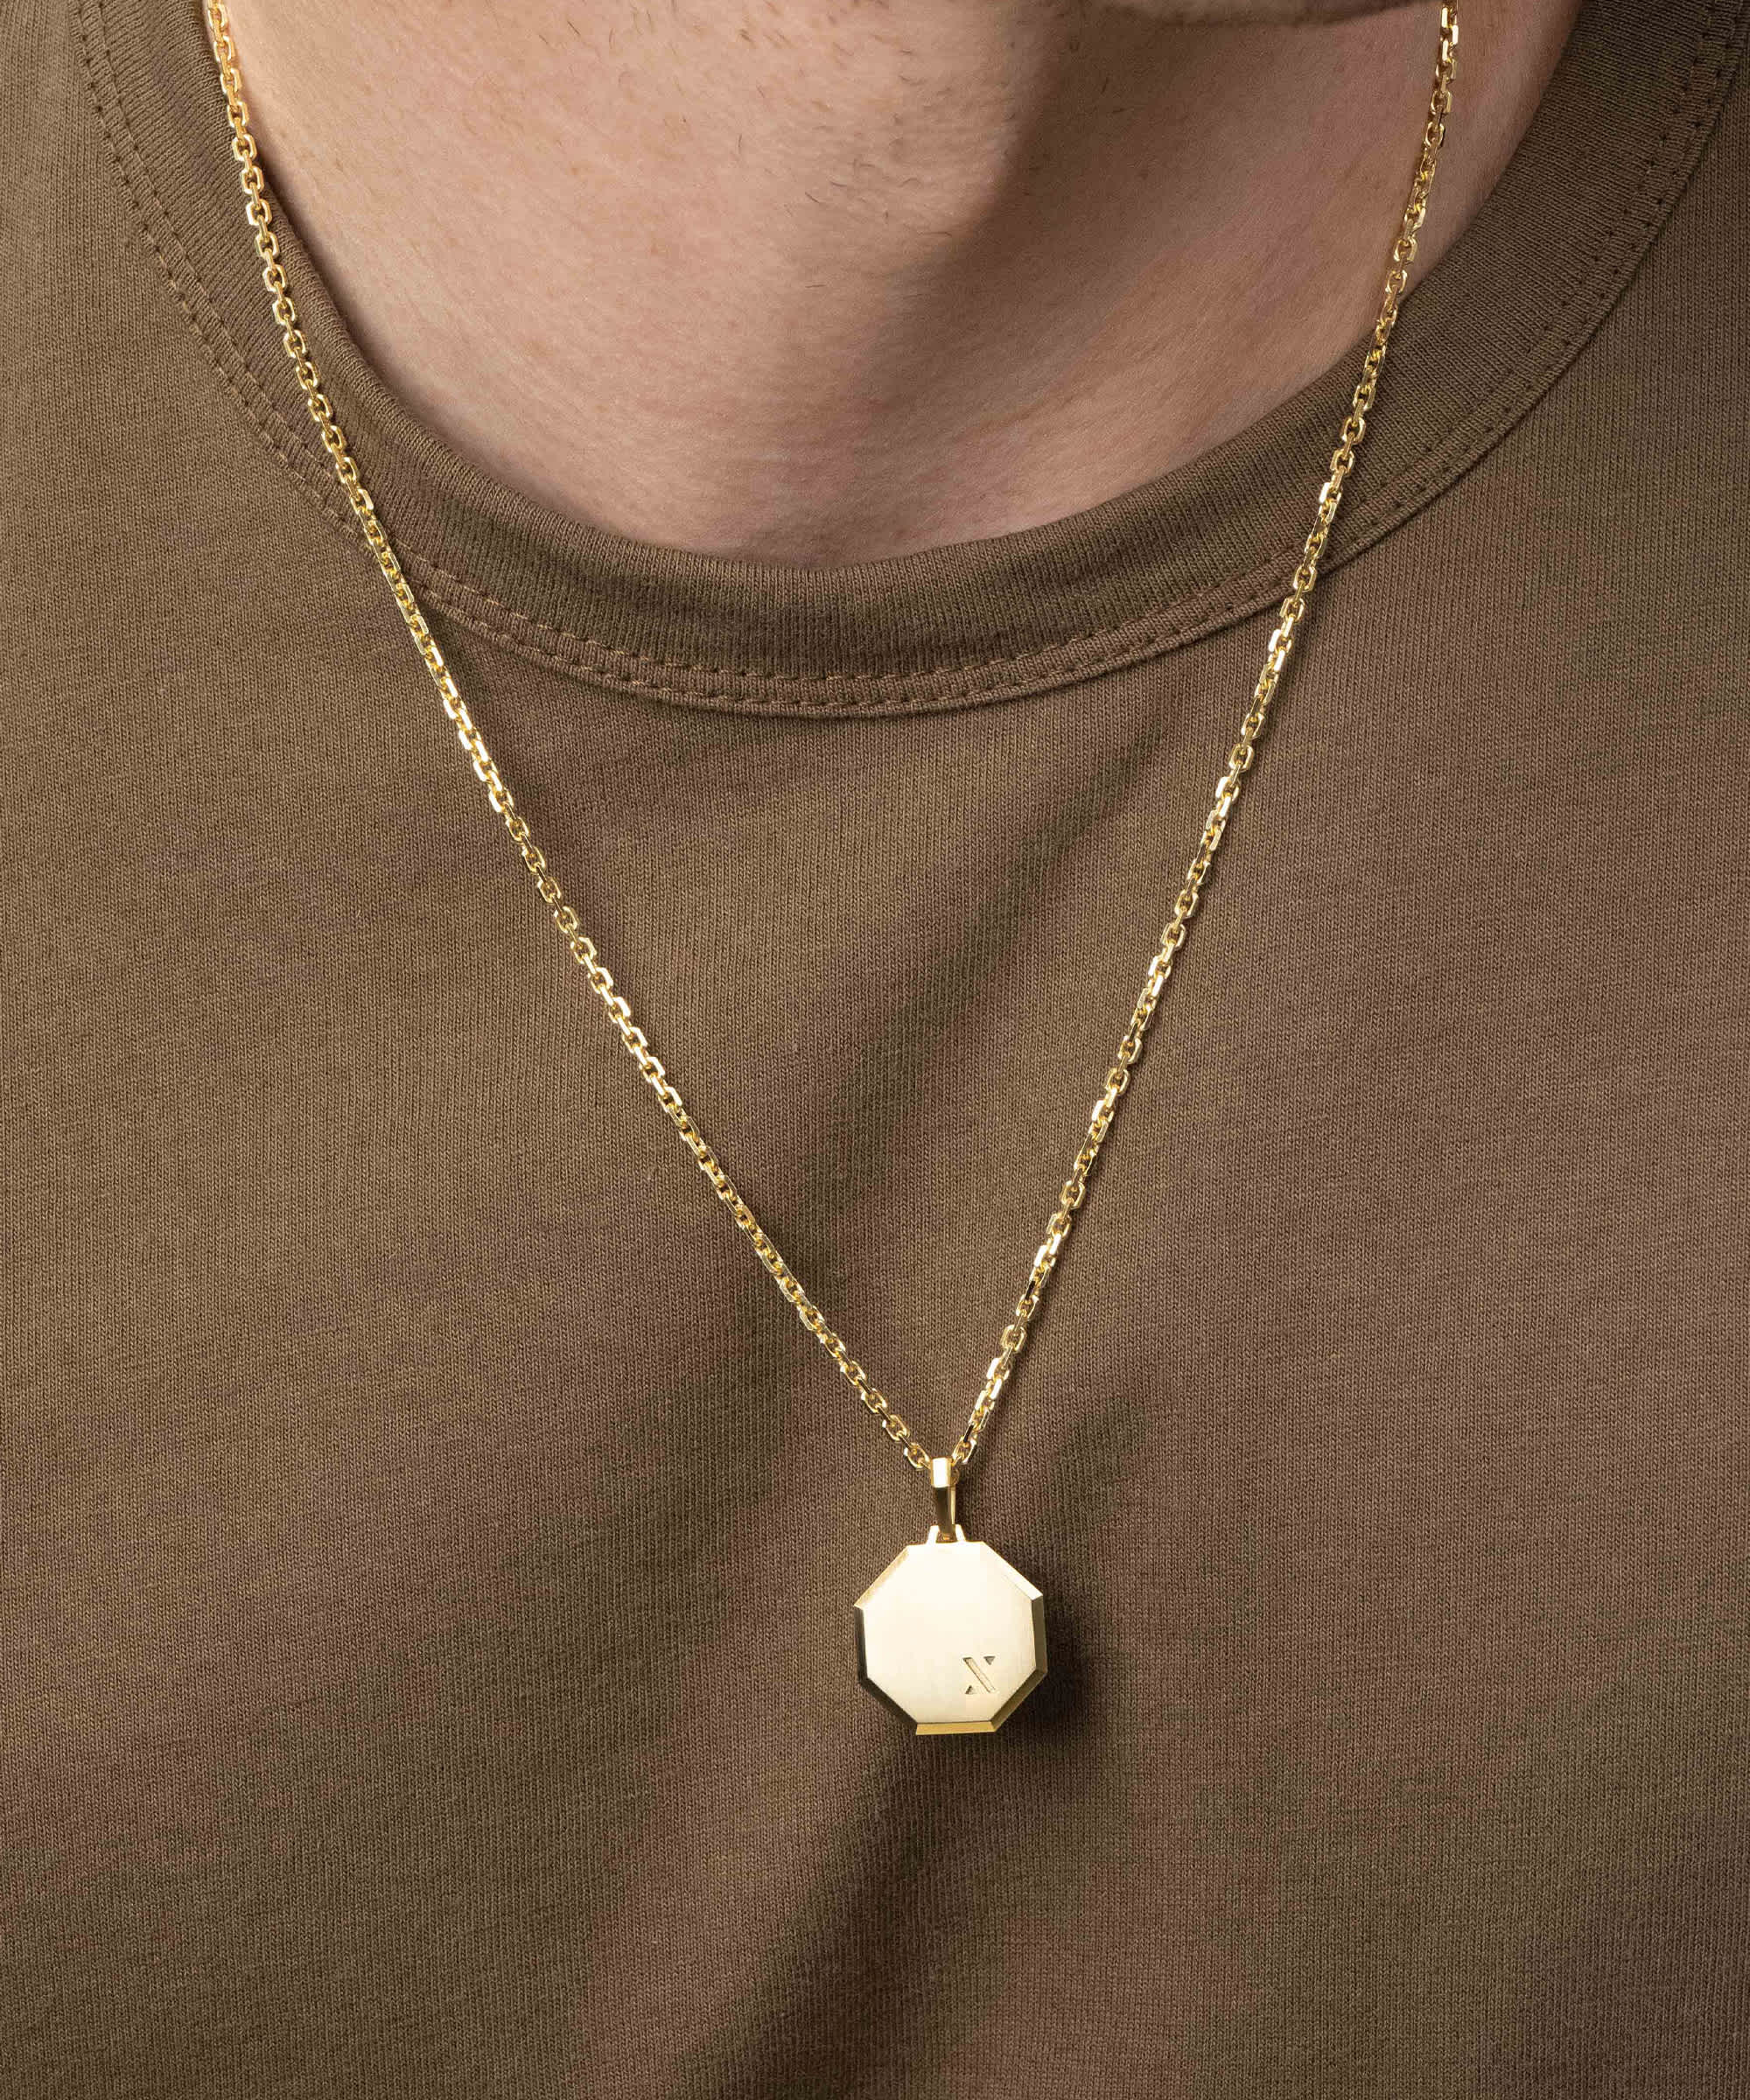 ATTENTION TO DETAIL - Combine Pendant Gold